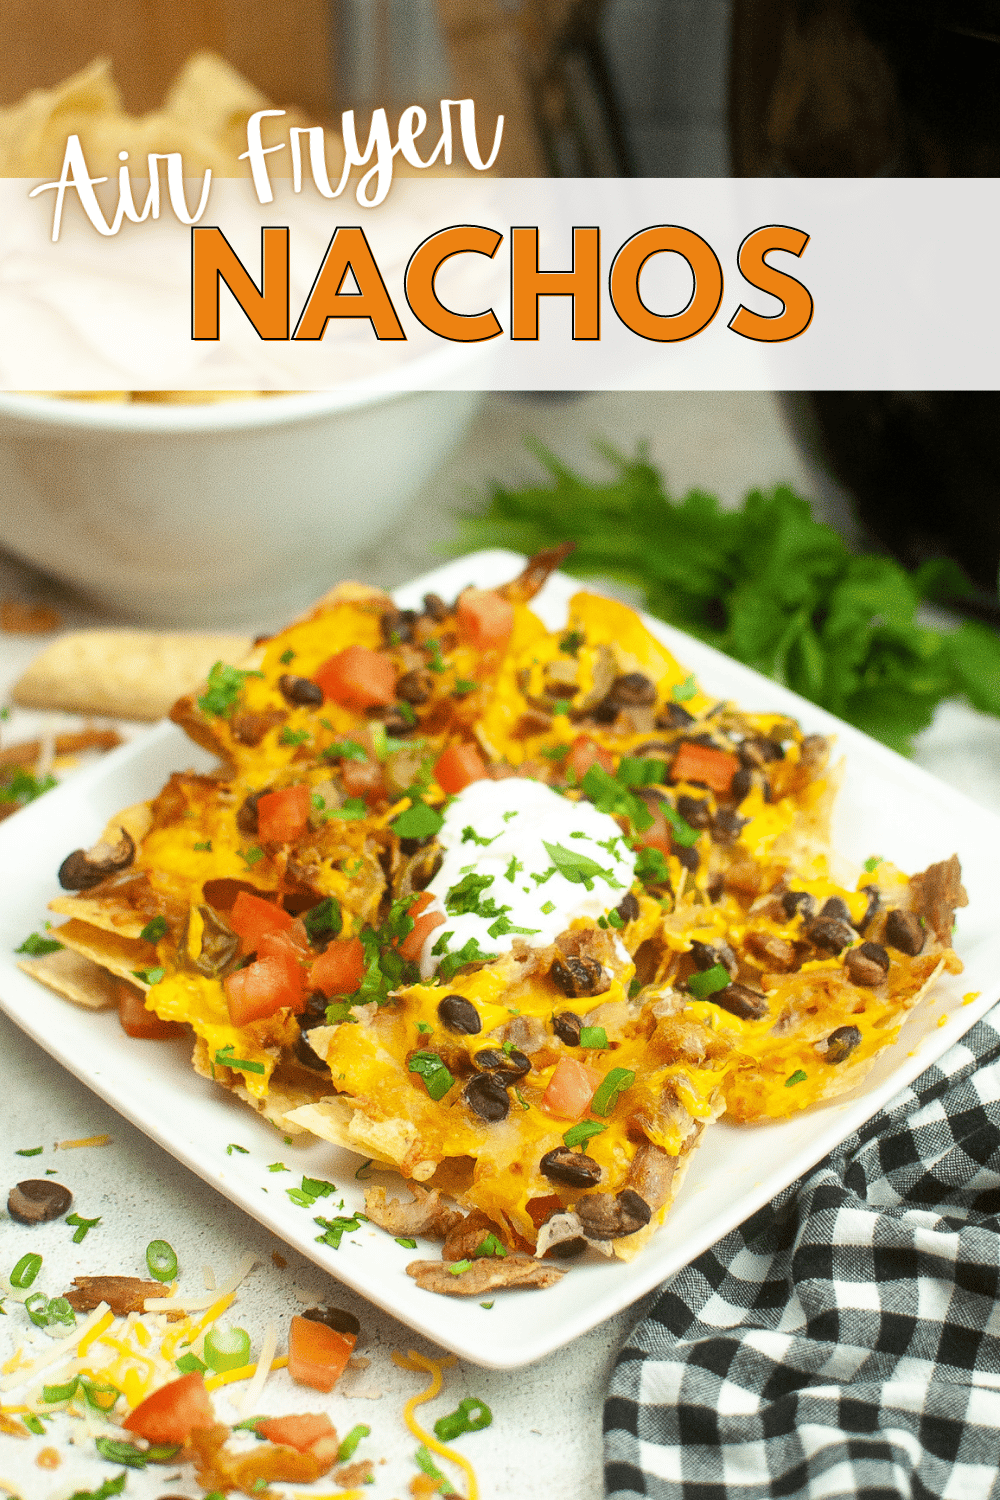 These Air Fryer Nachos are crispy, crunchy, and full of flavor. They're so easy to make on busy weeknights and will satisfy your whole family! #airfryernachos #porknachos #airfryer #nachos via @wondermomwannab